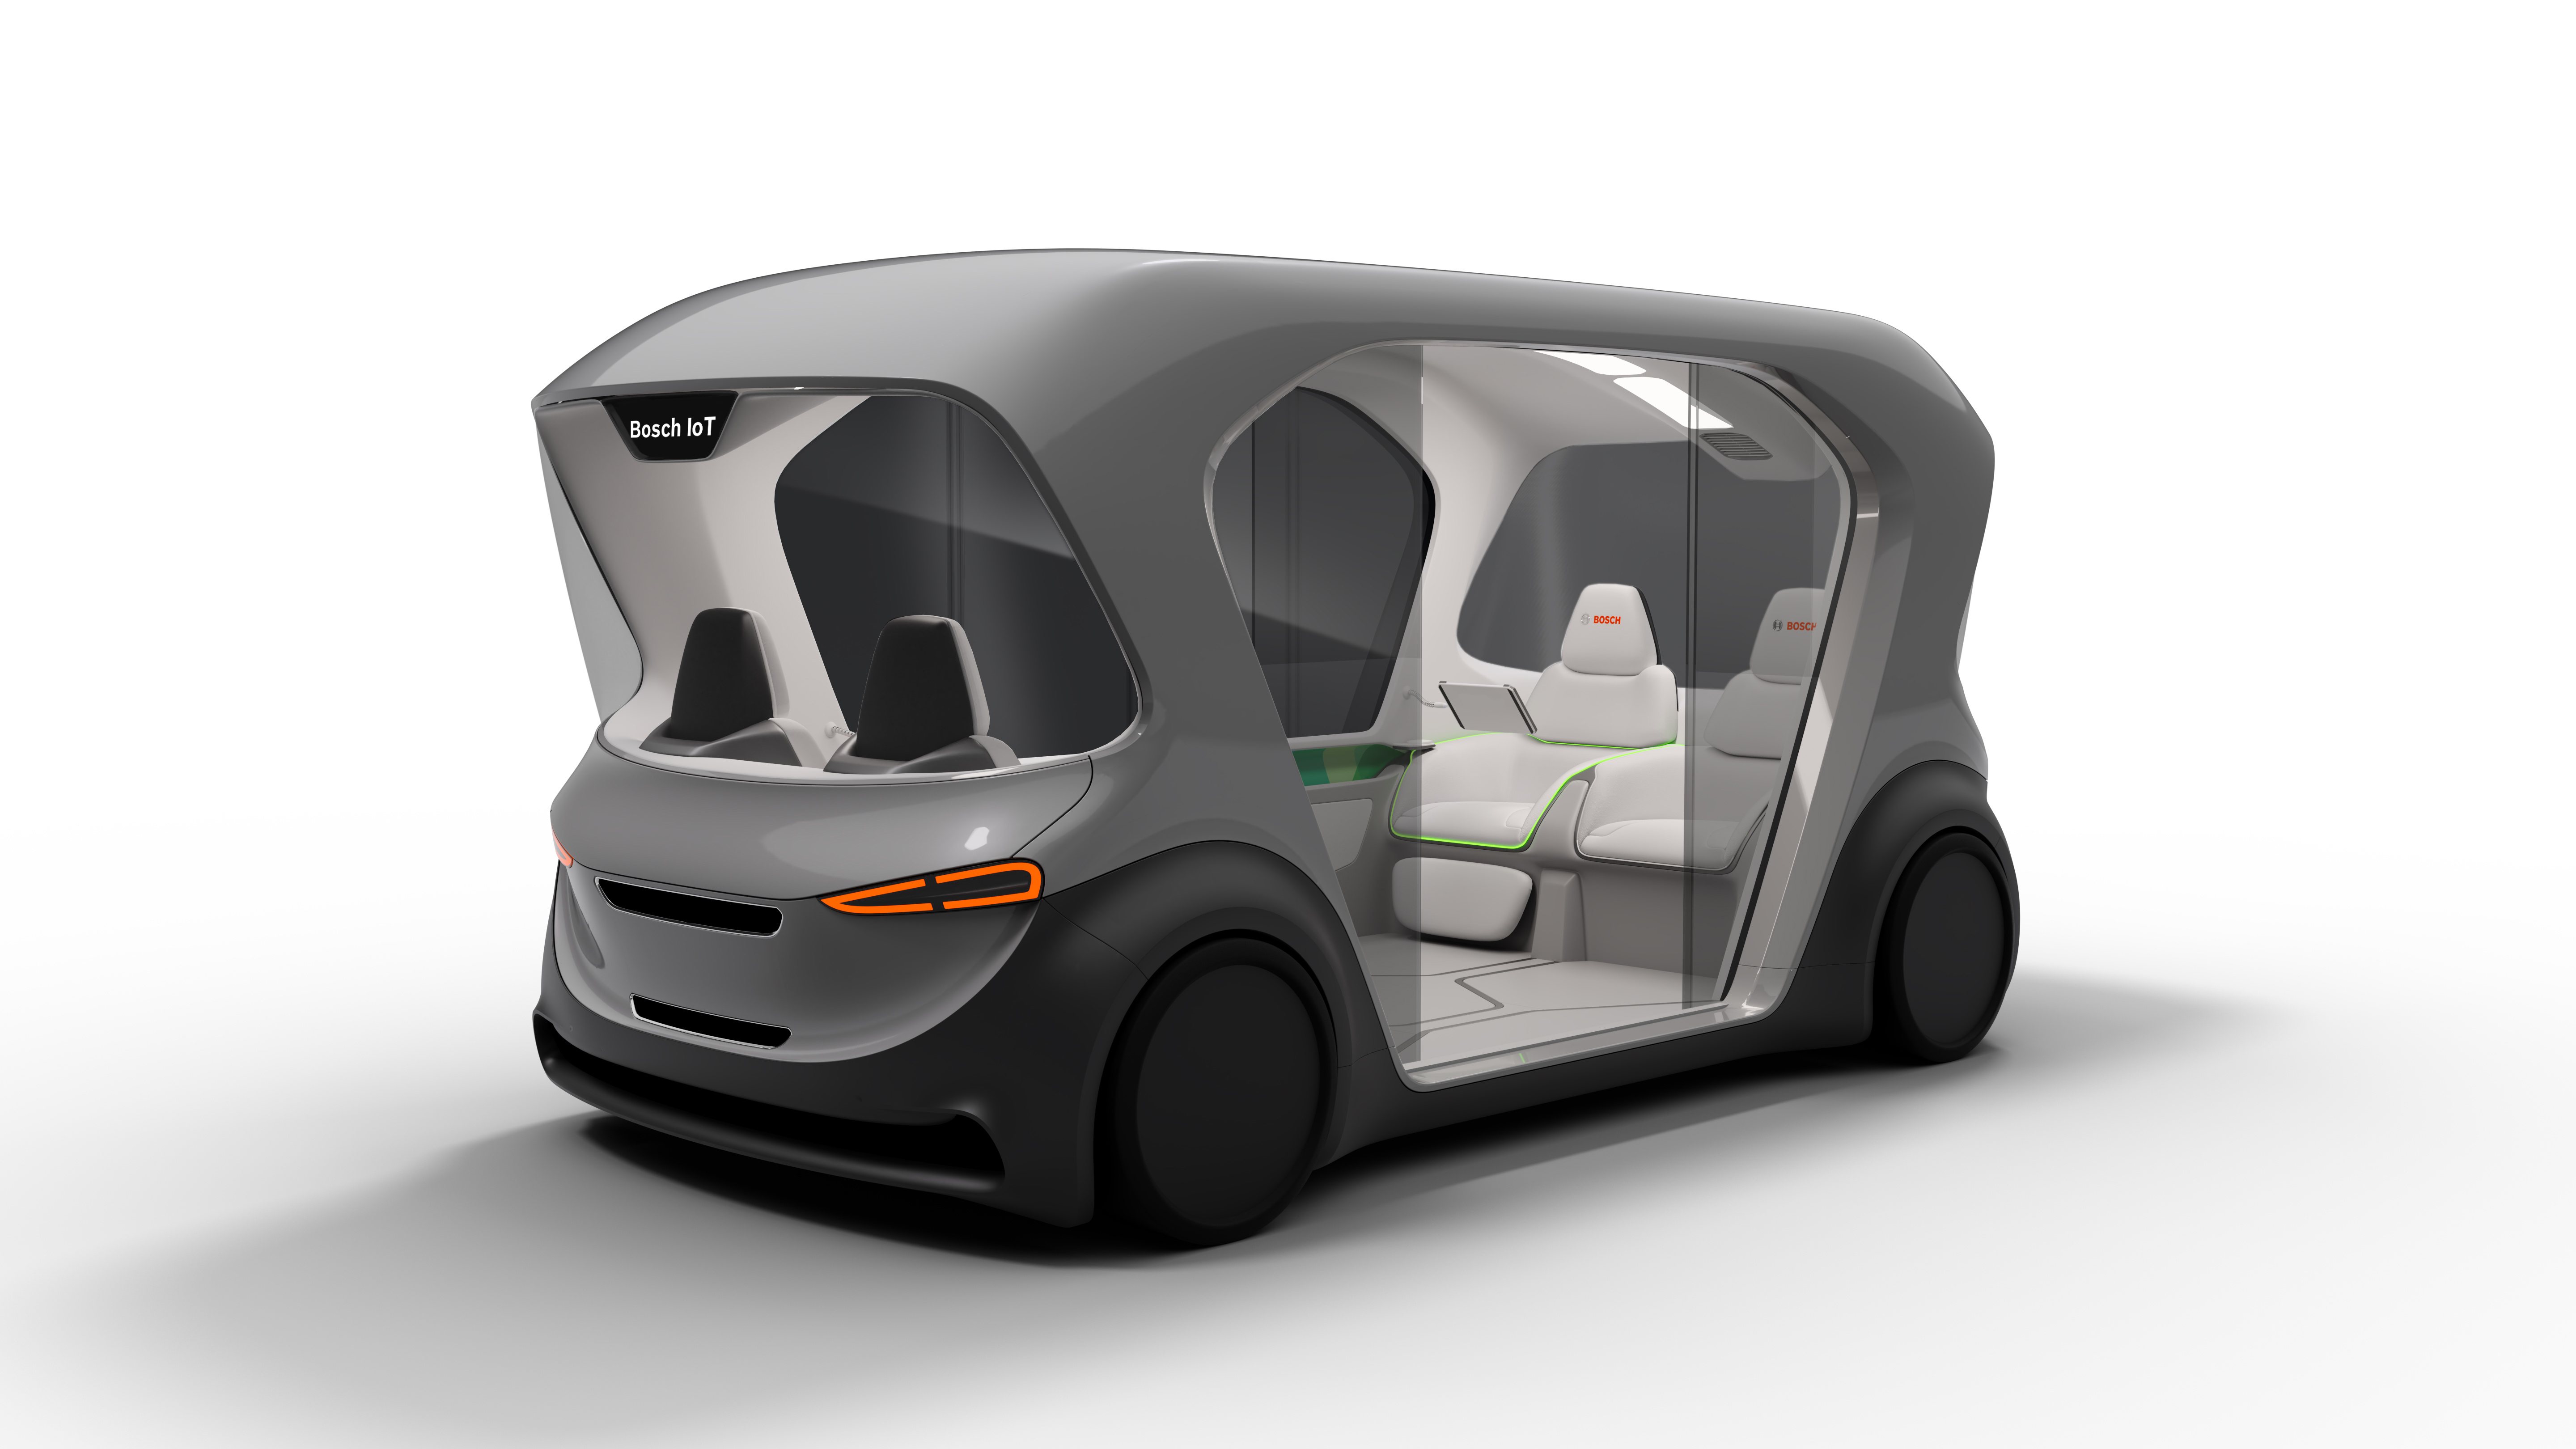 Debut of Bosch's new concept shuttle at CES 2019 in Las Vegas